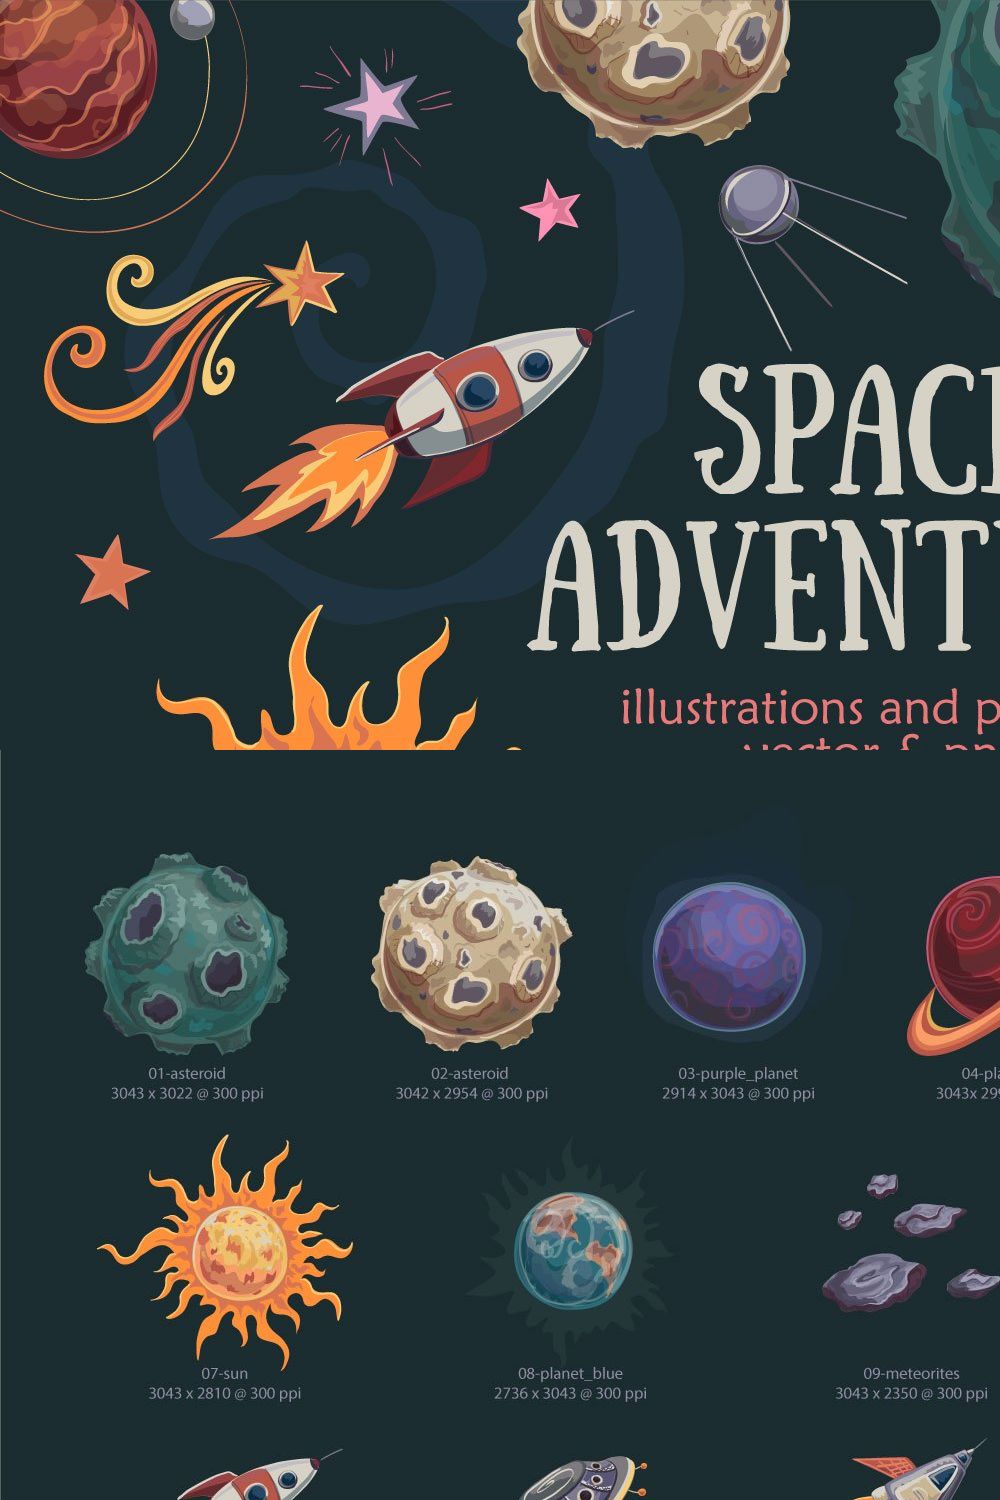 Сollection "Space adventure" pinterest preview image.